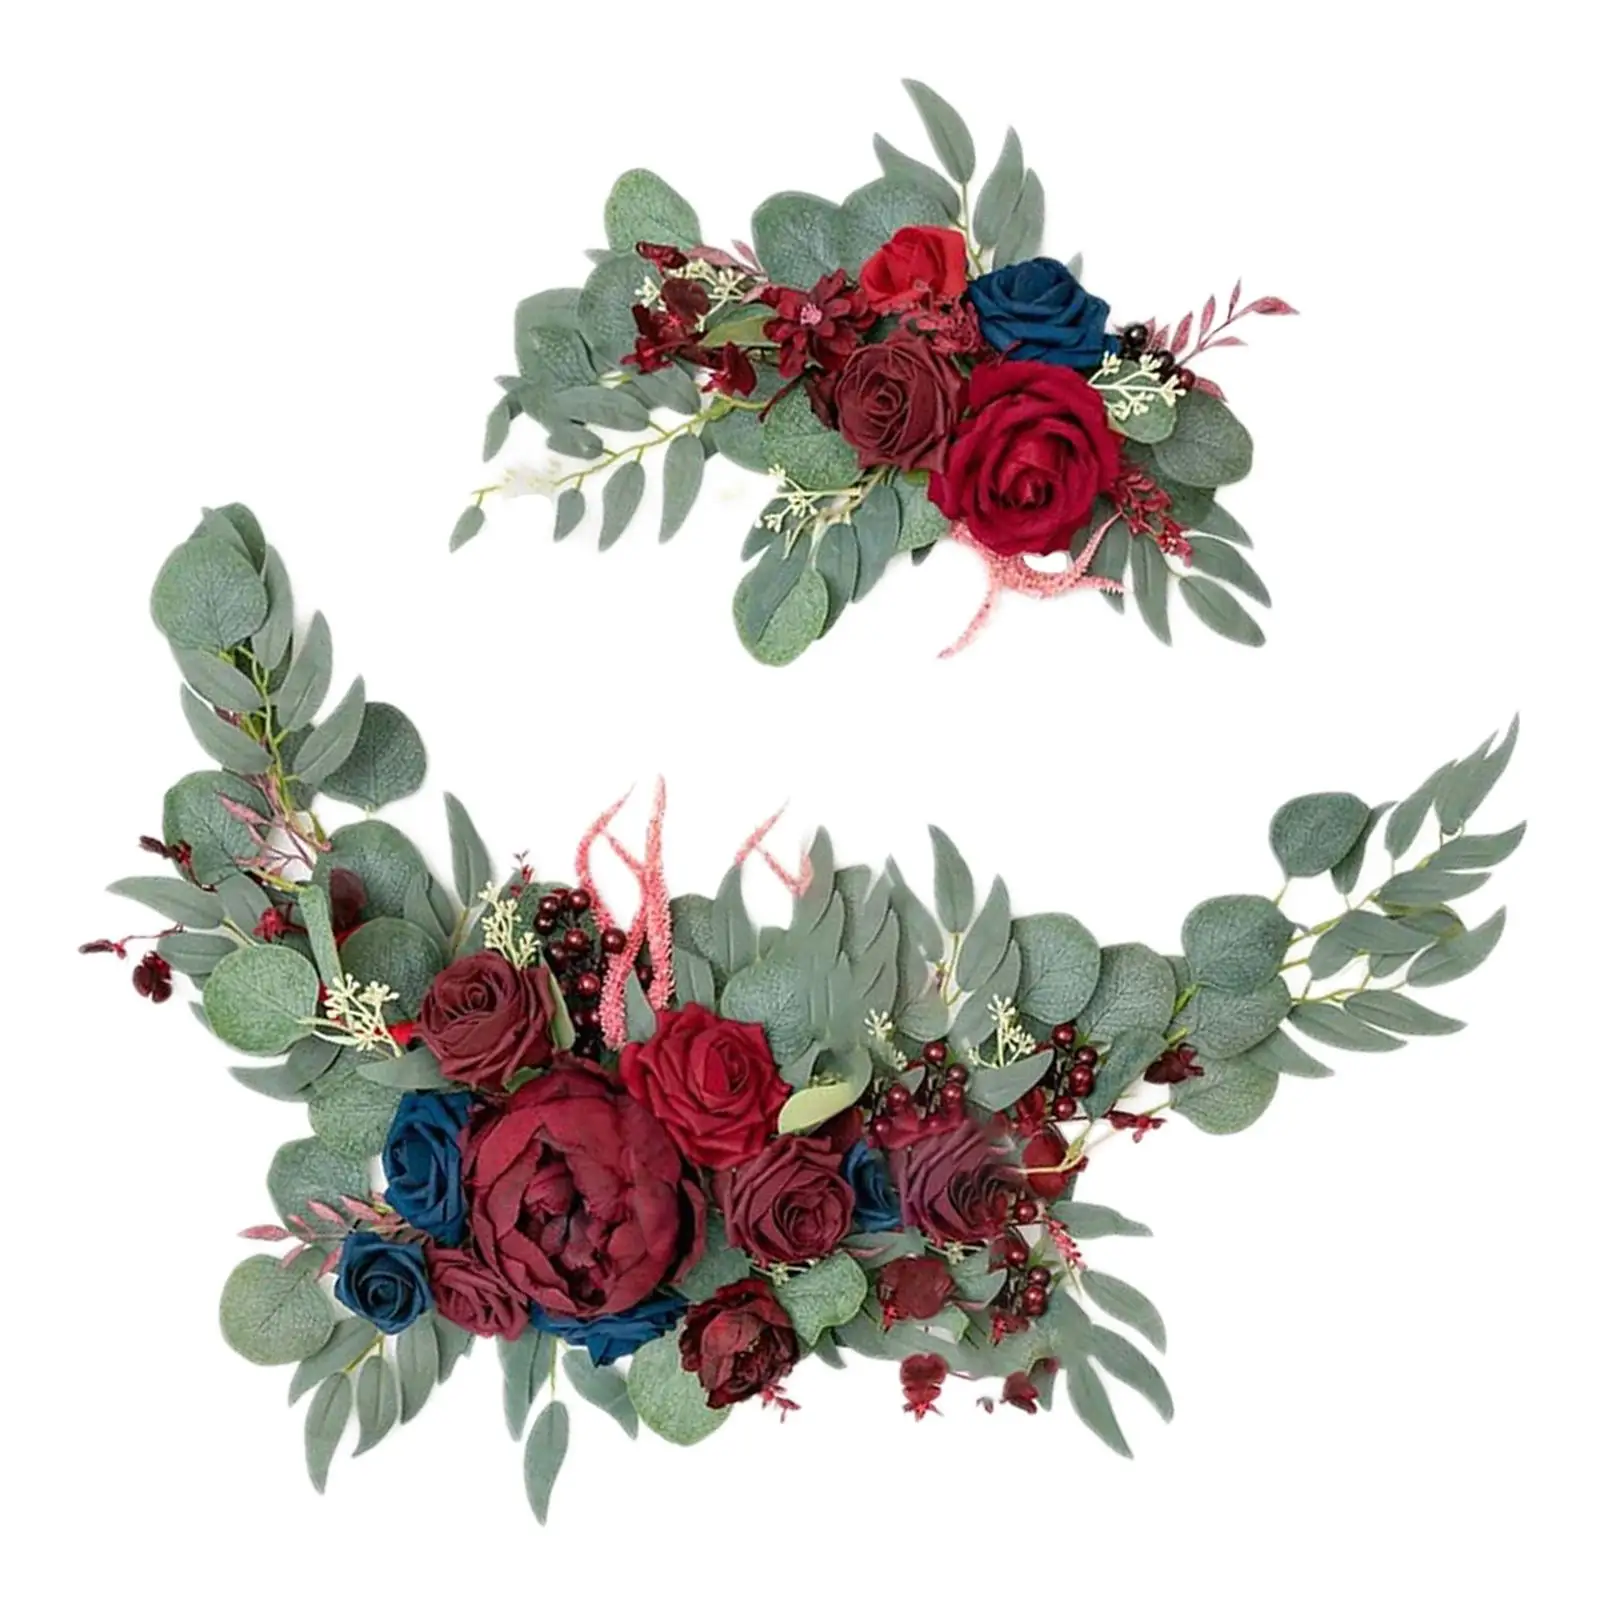 Wedding Arch Rose Wreath Centerpiece Garland for Ceremony Home Ornament